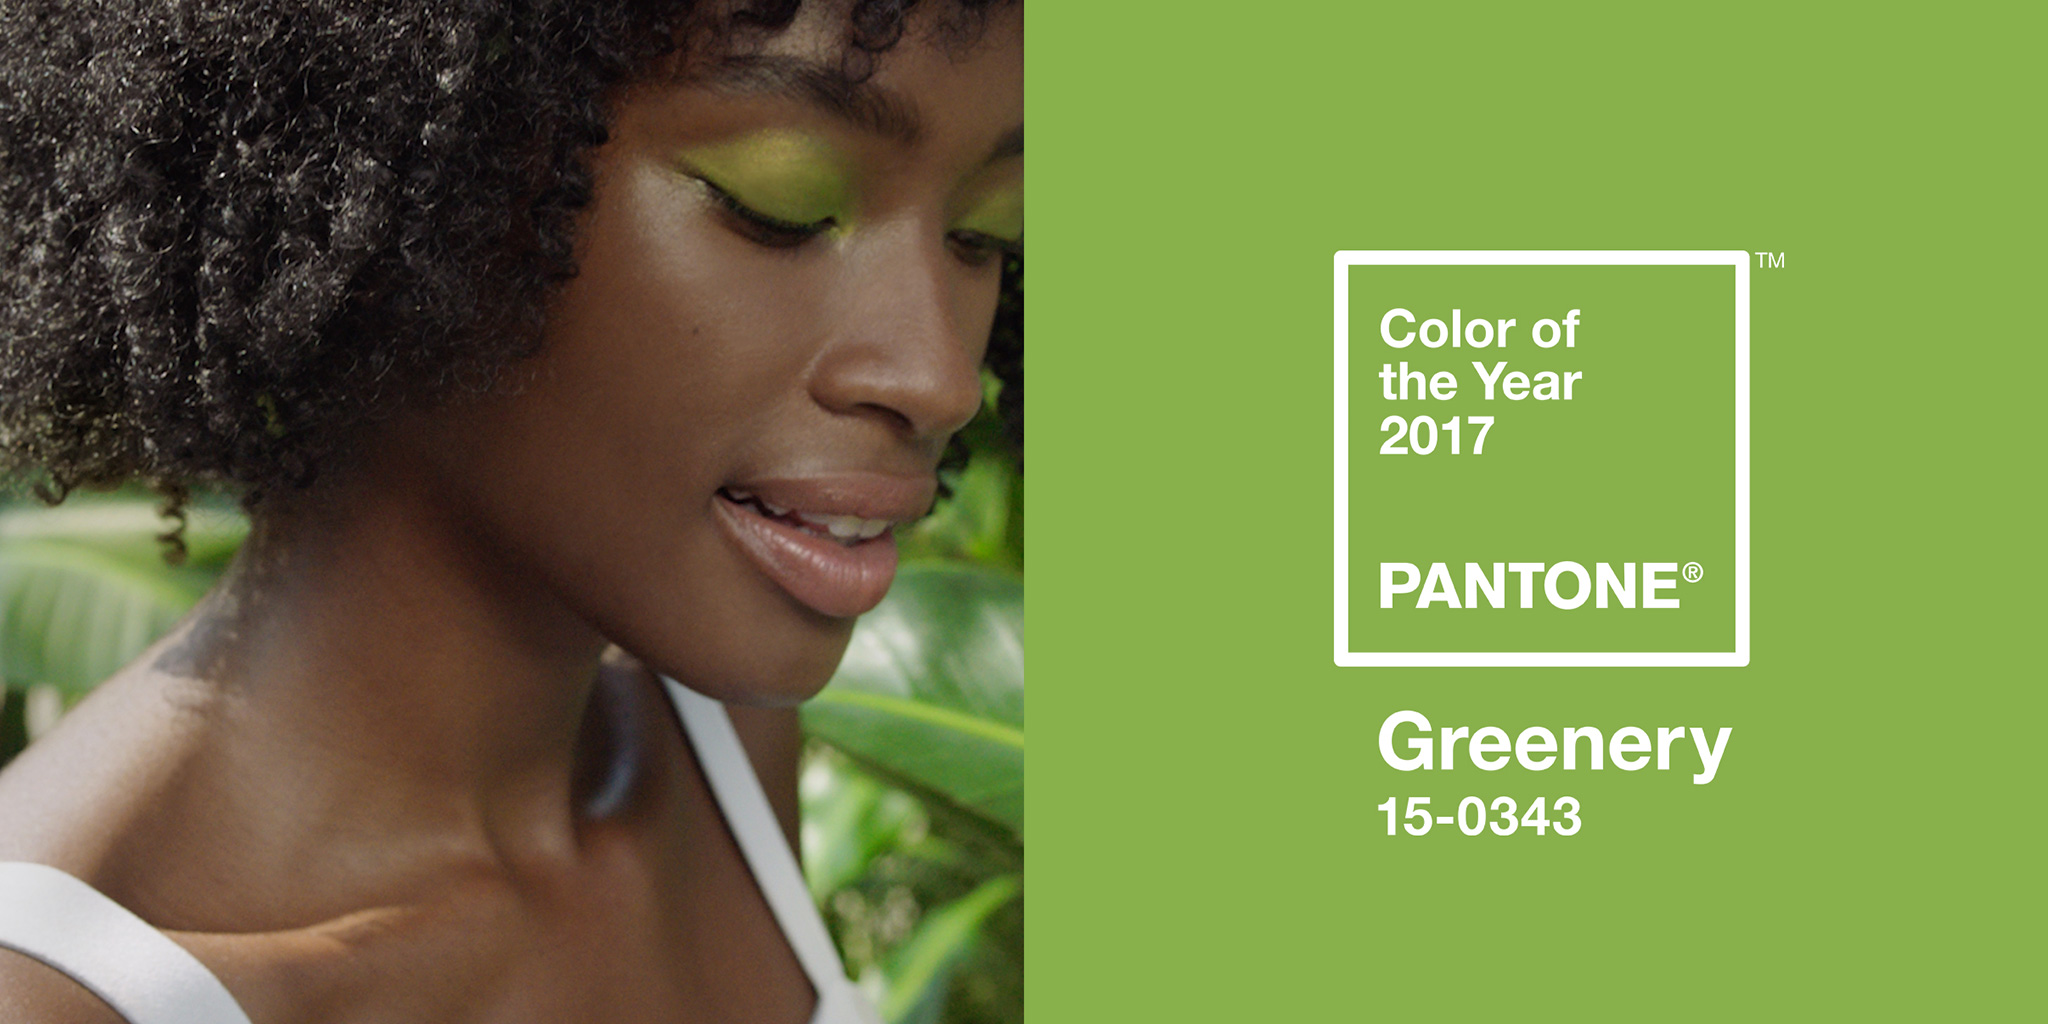 Image result for pantone color of the year 2017 greenery